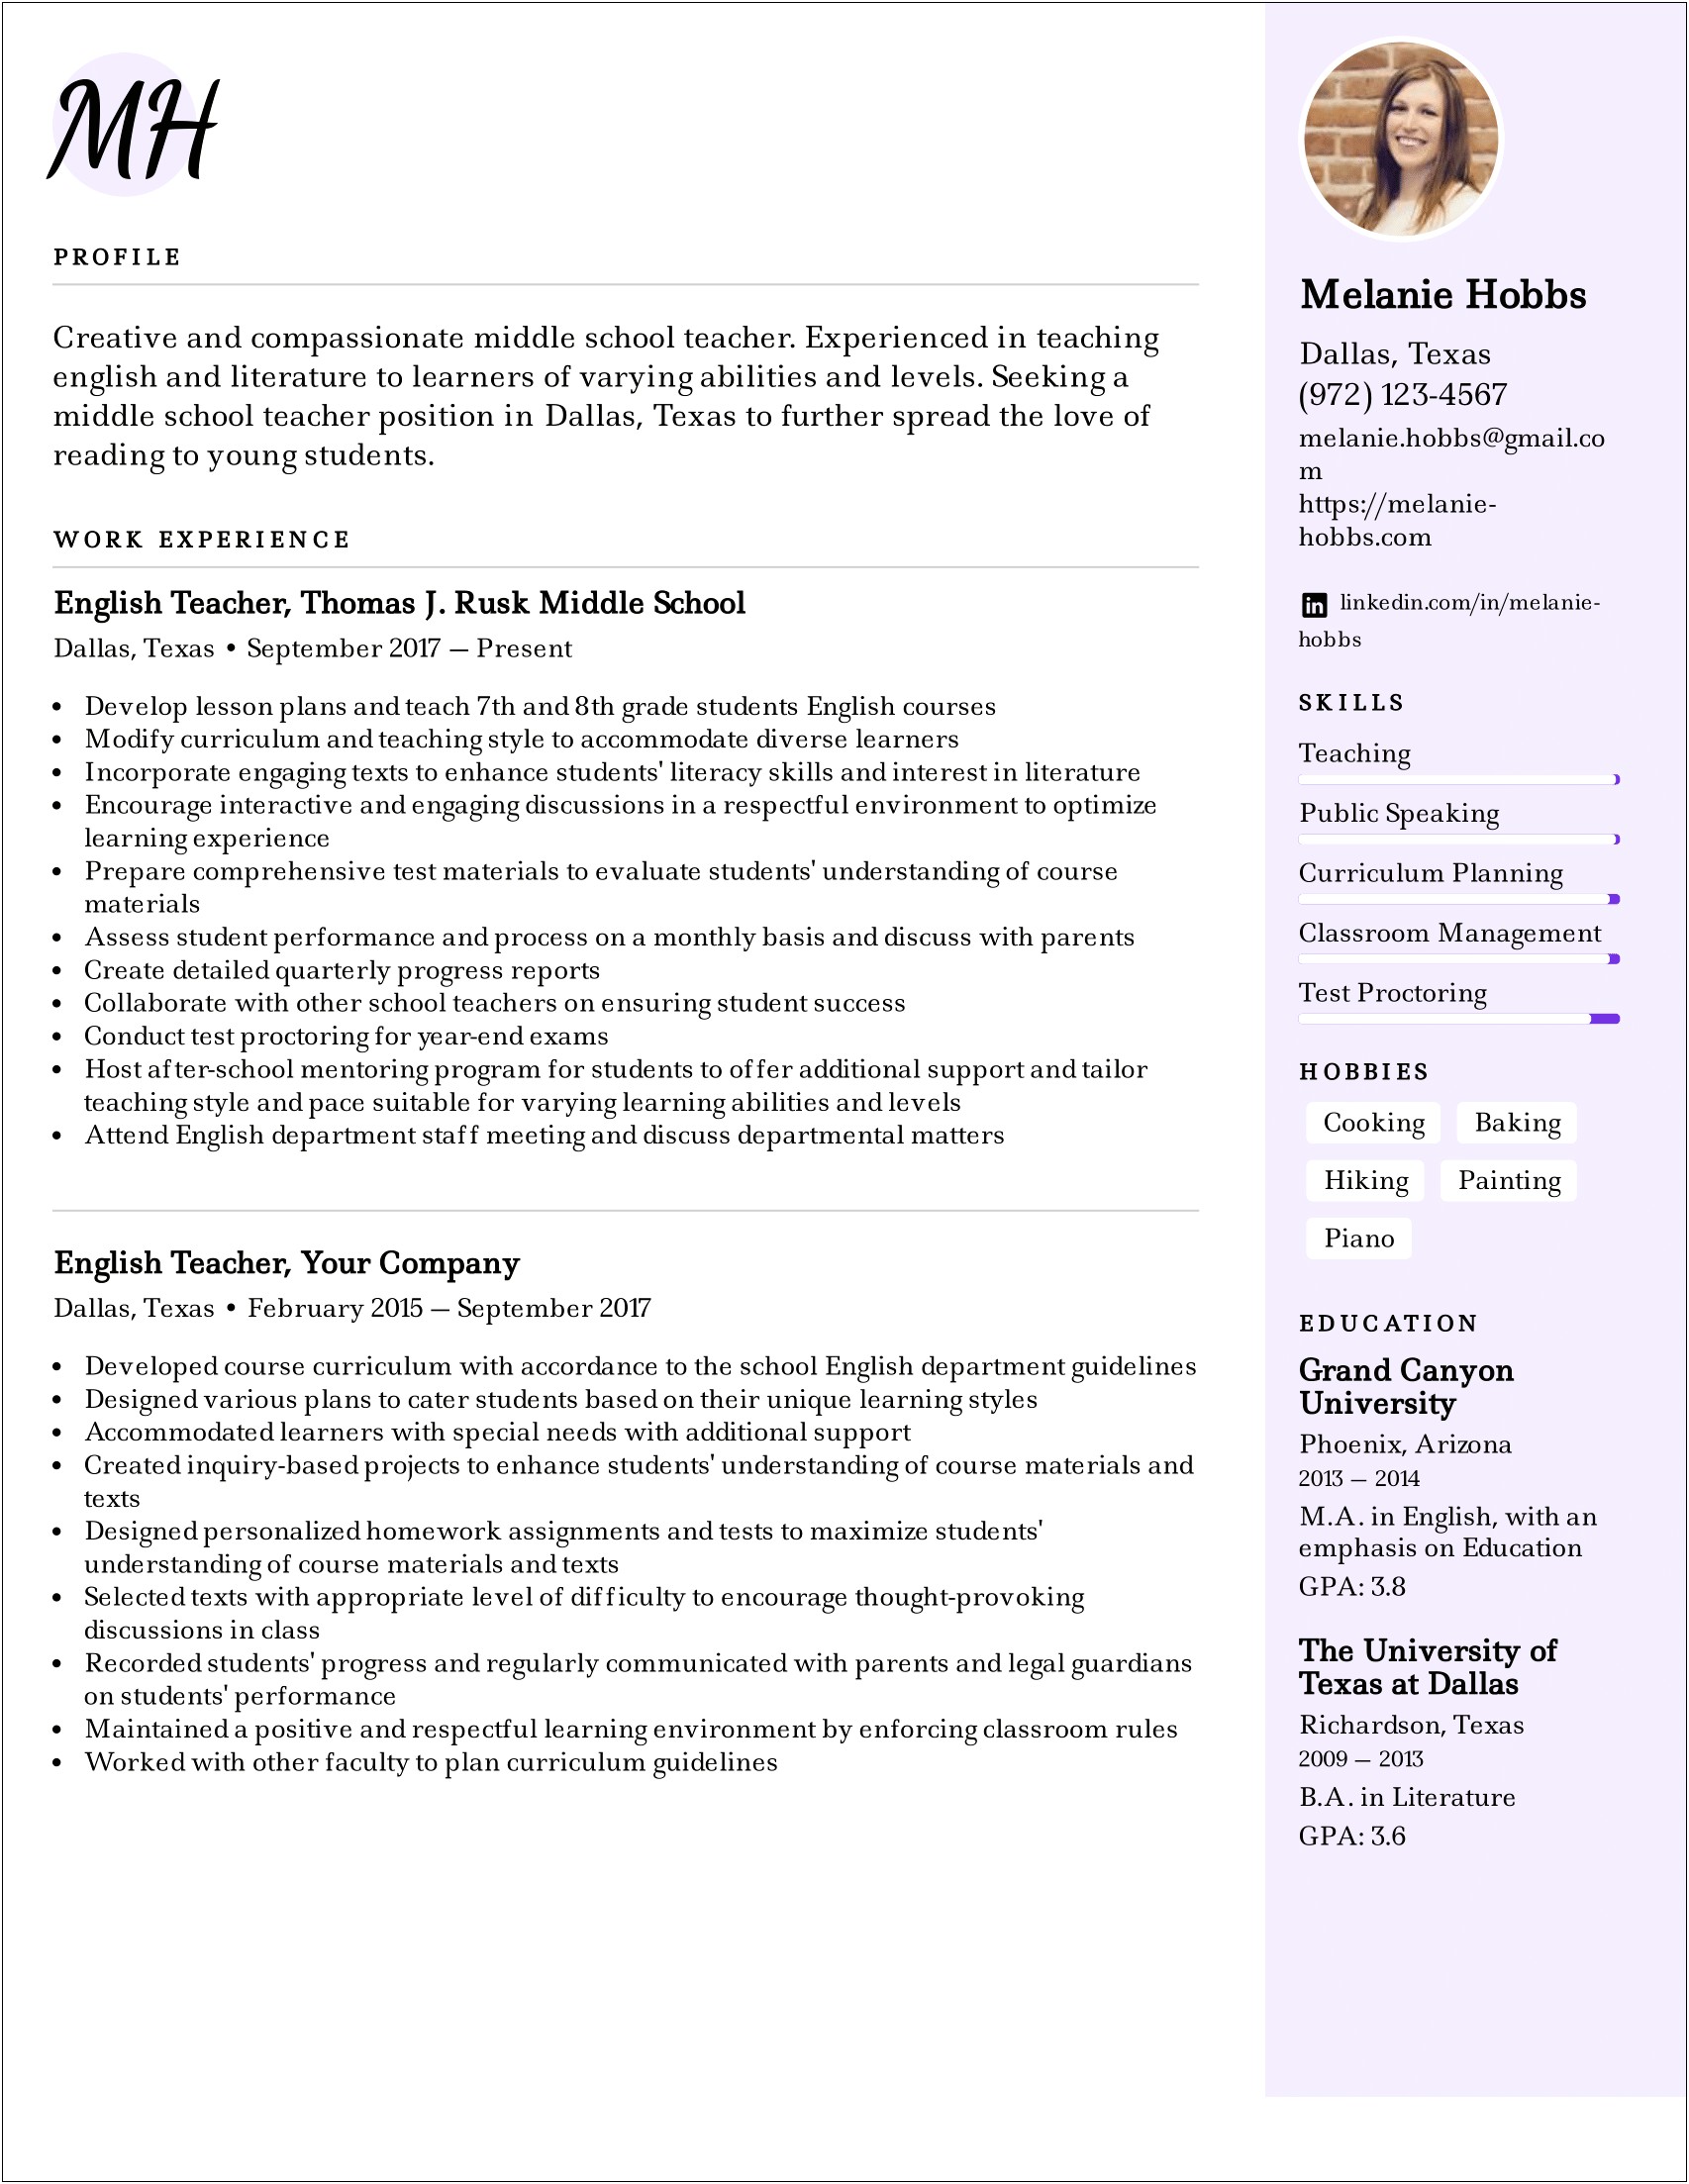 Resume Examples 2015 For College Students